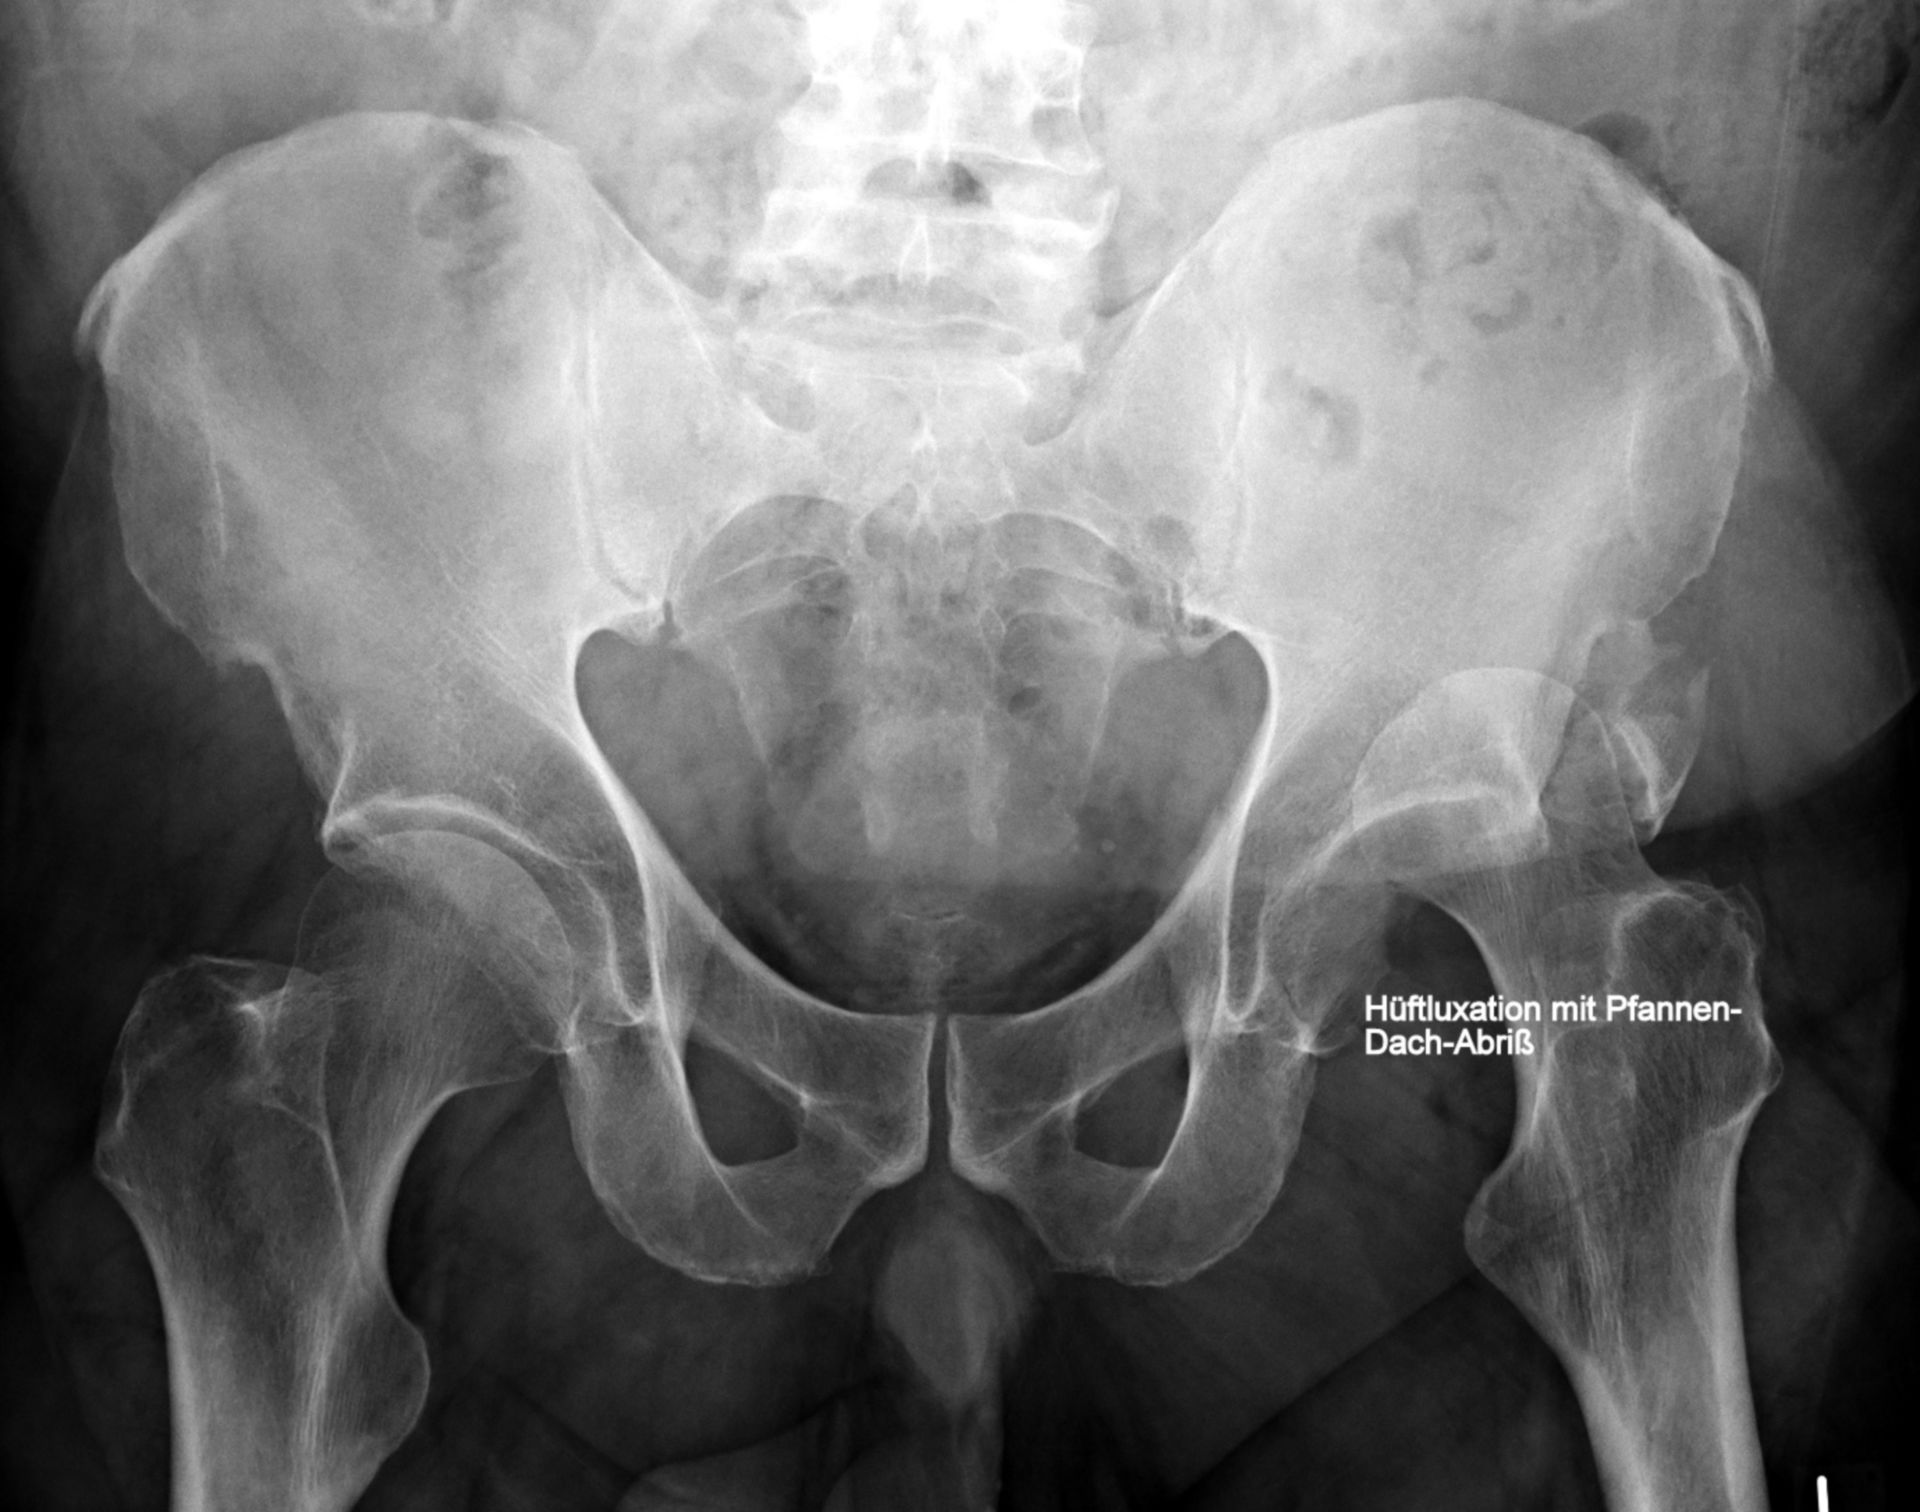 Dislocation of hip joint